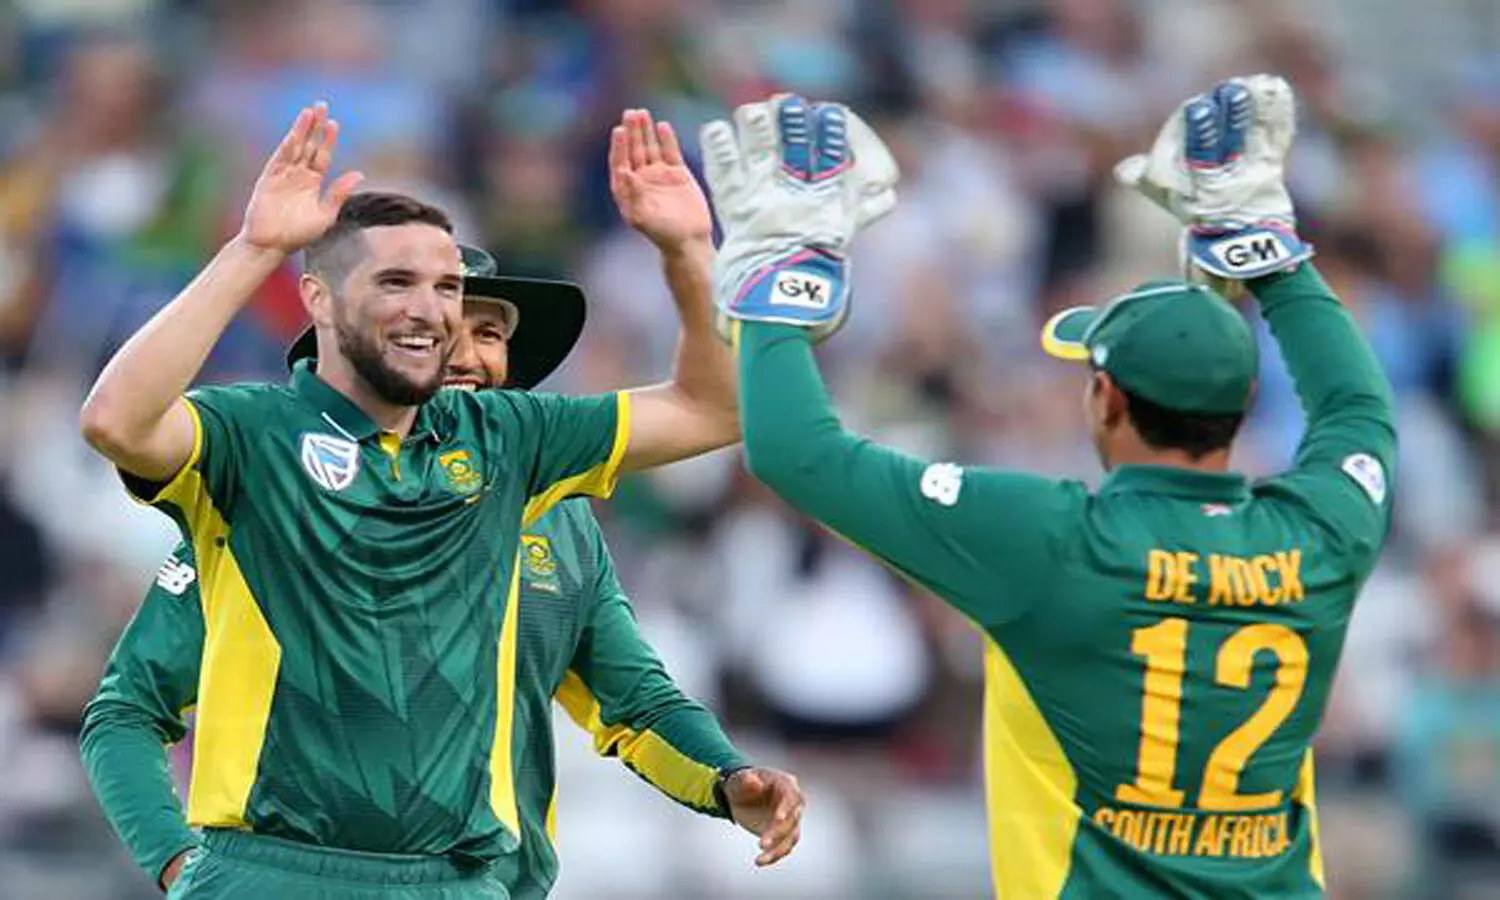 How is Odisha?: Asks reporter, South Africa pacer Wayne Parnell gives classic reply